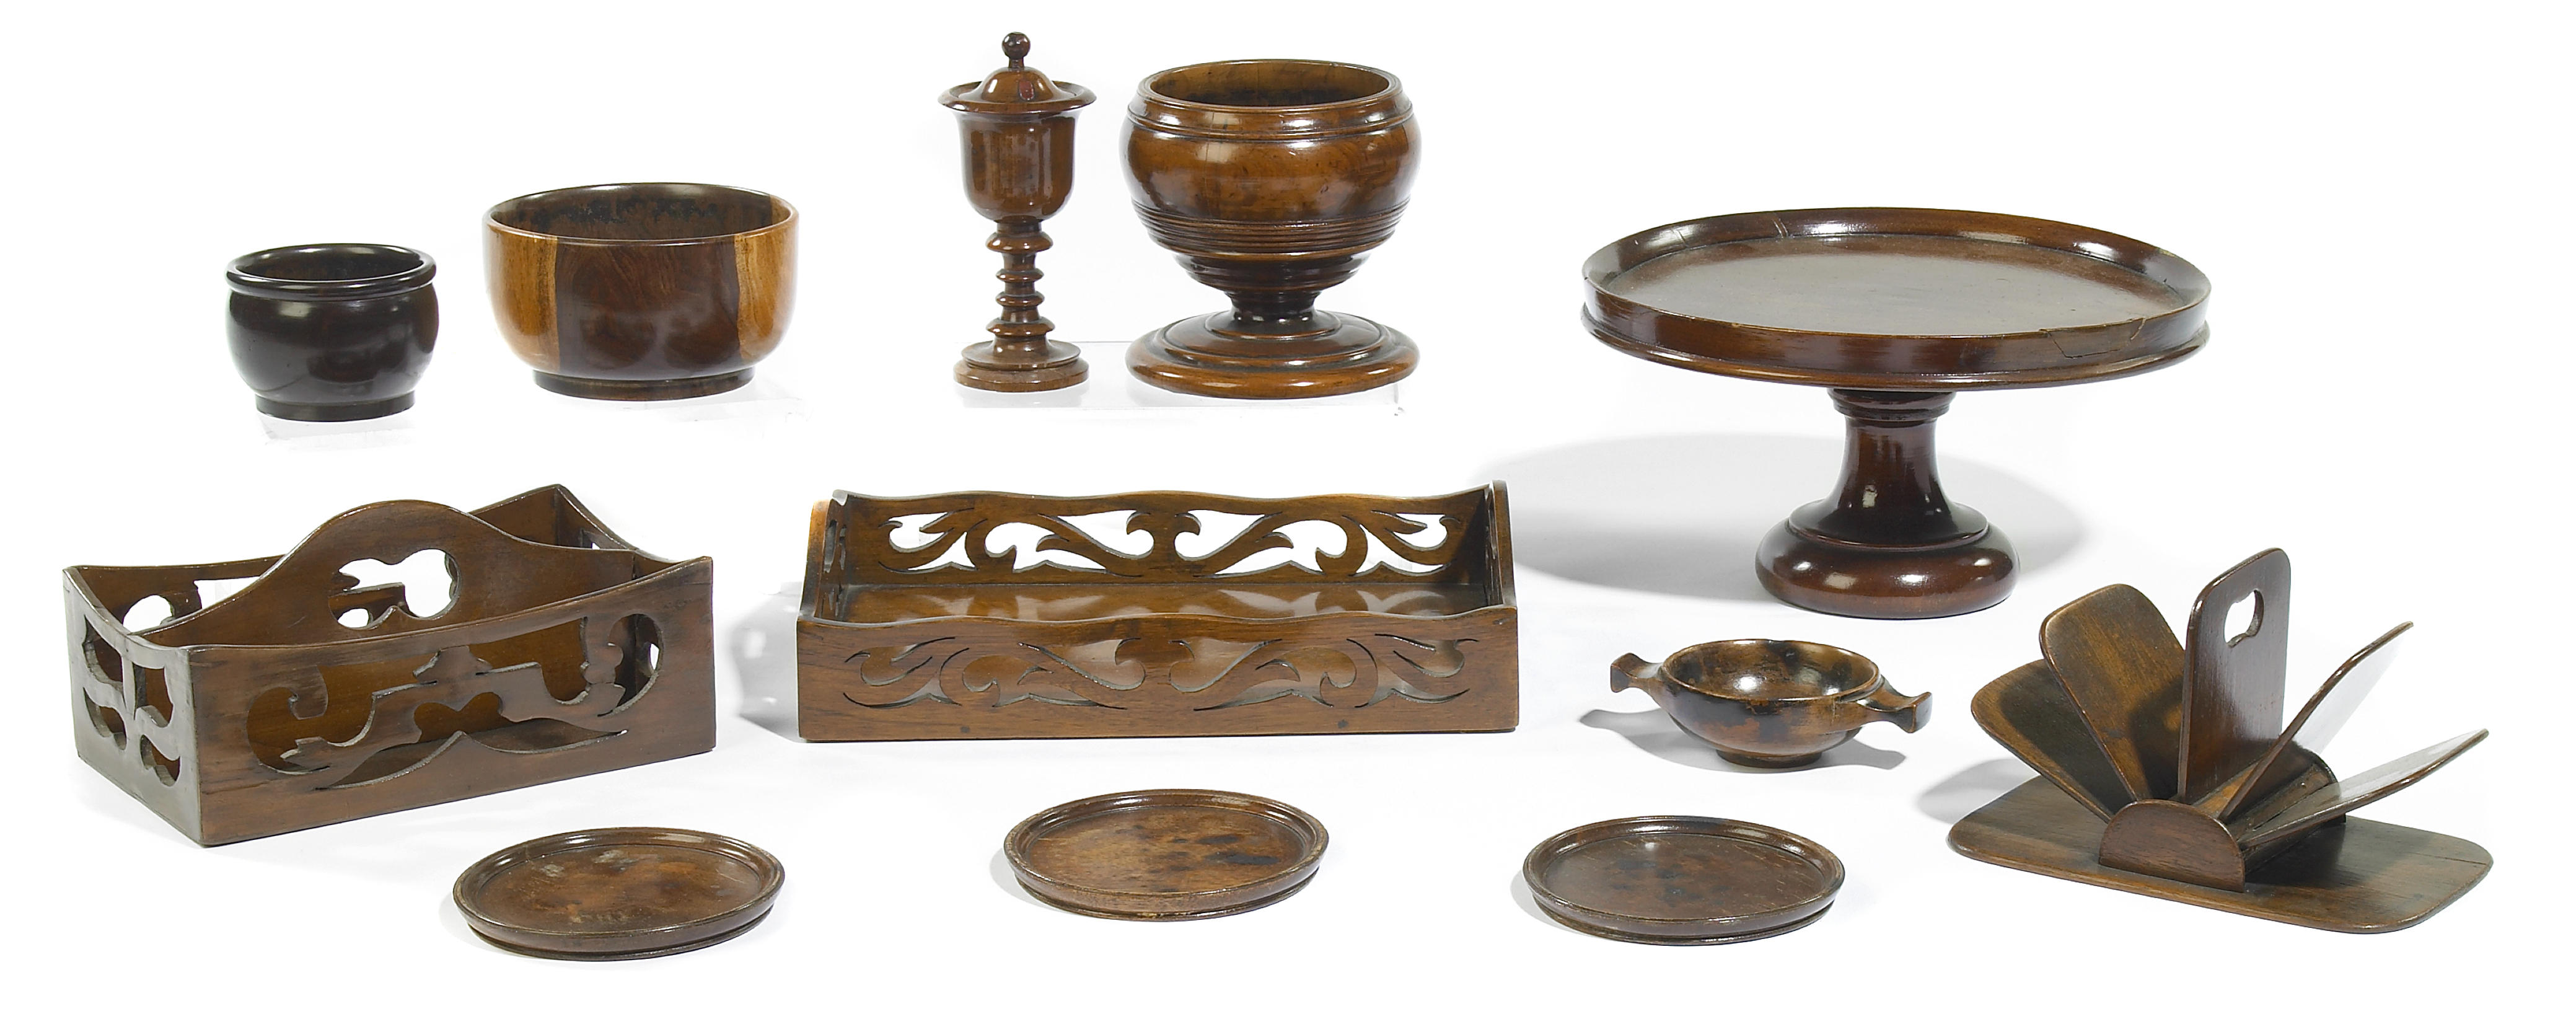 A group of decorative treenware